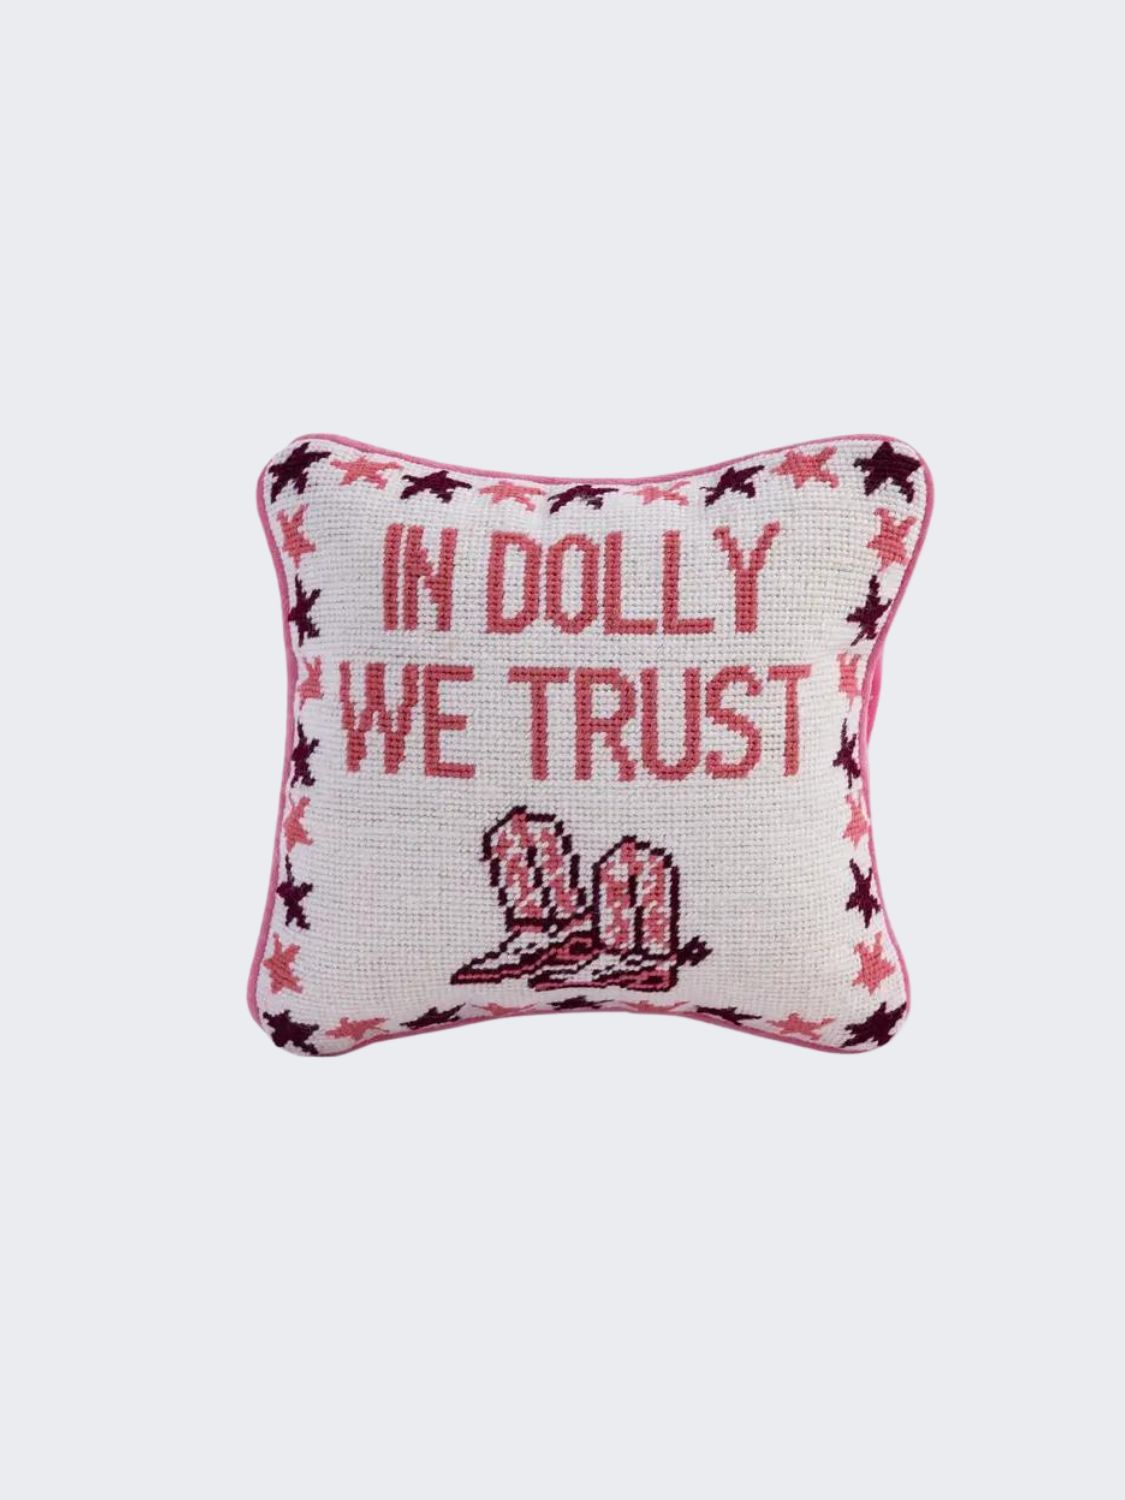 In Dolly We Trust Needlepoint Pillow